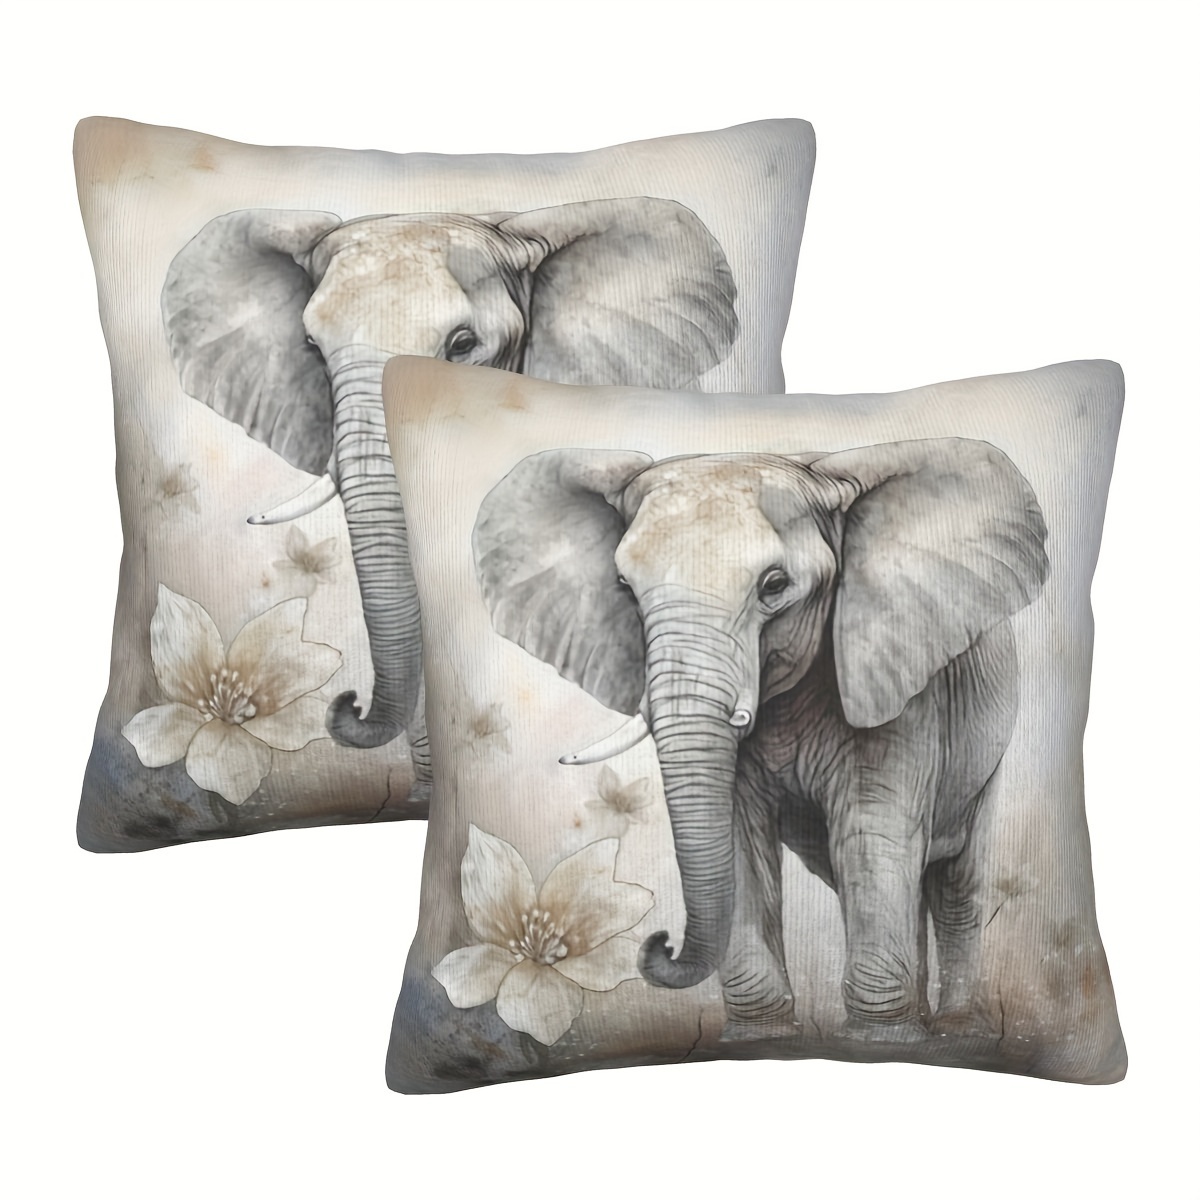 

2pcs, Animals Cute Elephant Short Plush Pillow Covers Farmhouse Home Decor Sofa Cushions For Couch Bed Living Room Anopisthograph 18 X 18 Inch, No Pillow Core